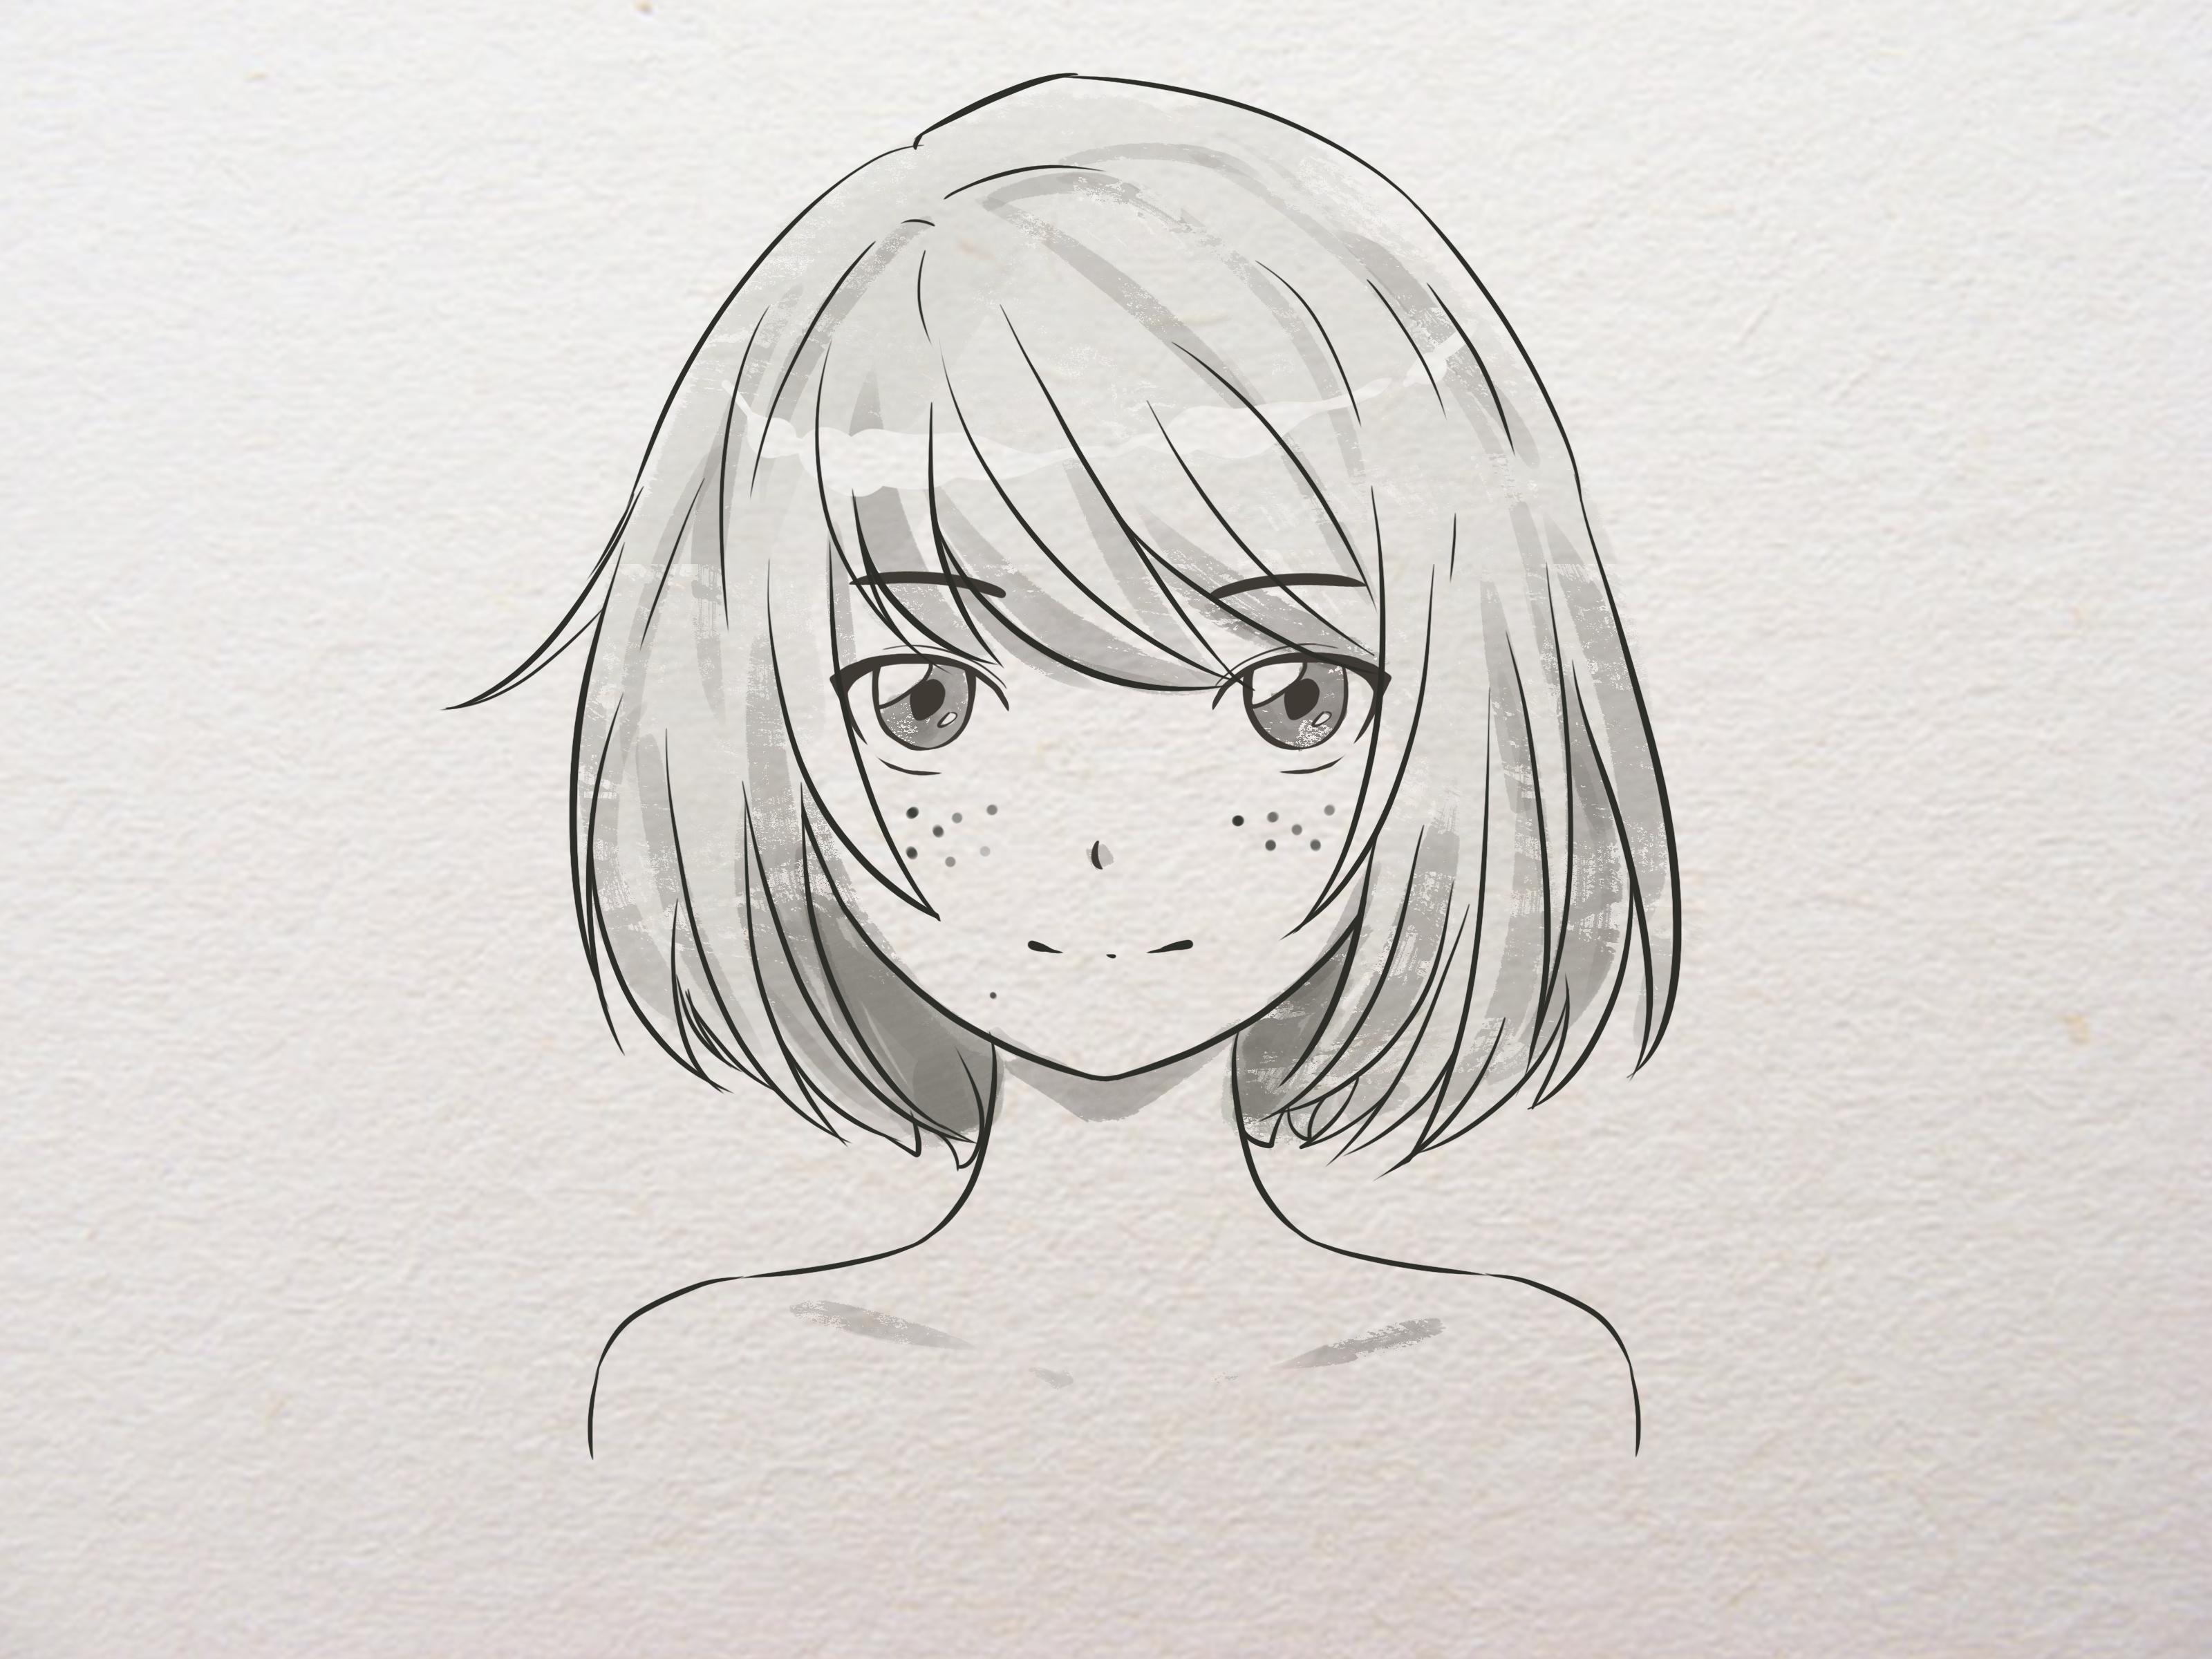 How to Draw Anime or Manga Faces: 15 Steps